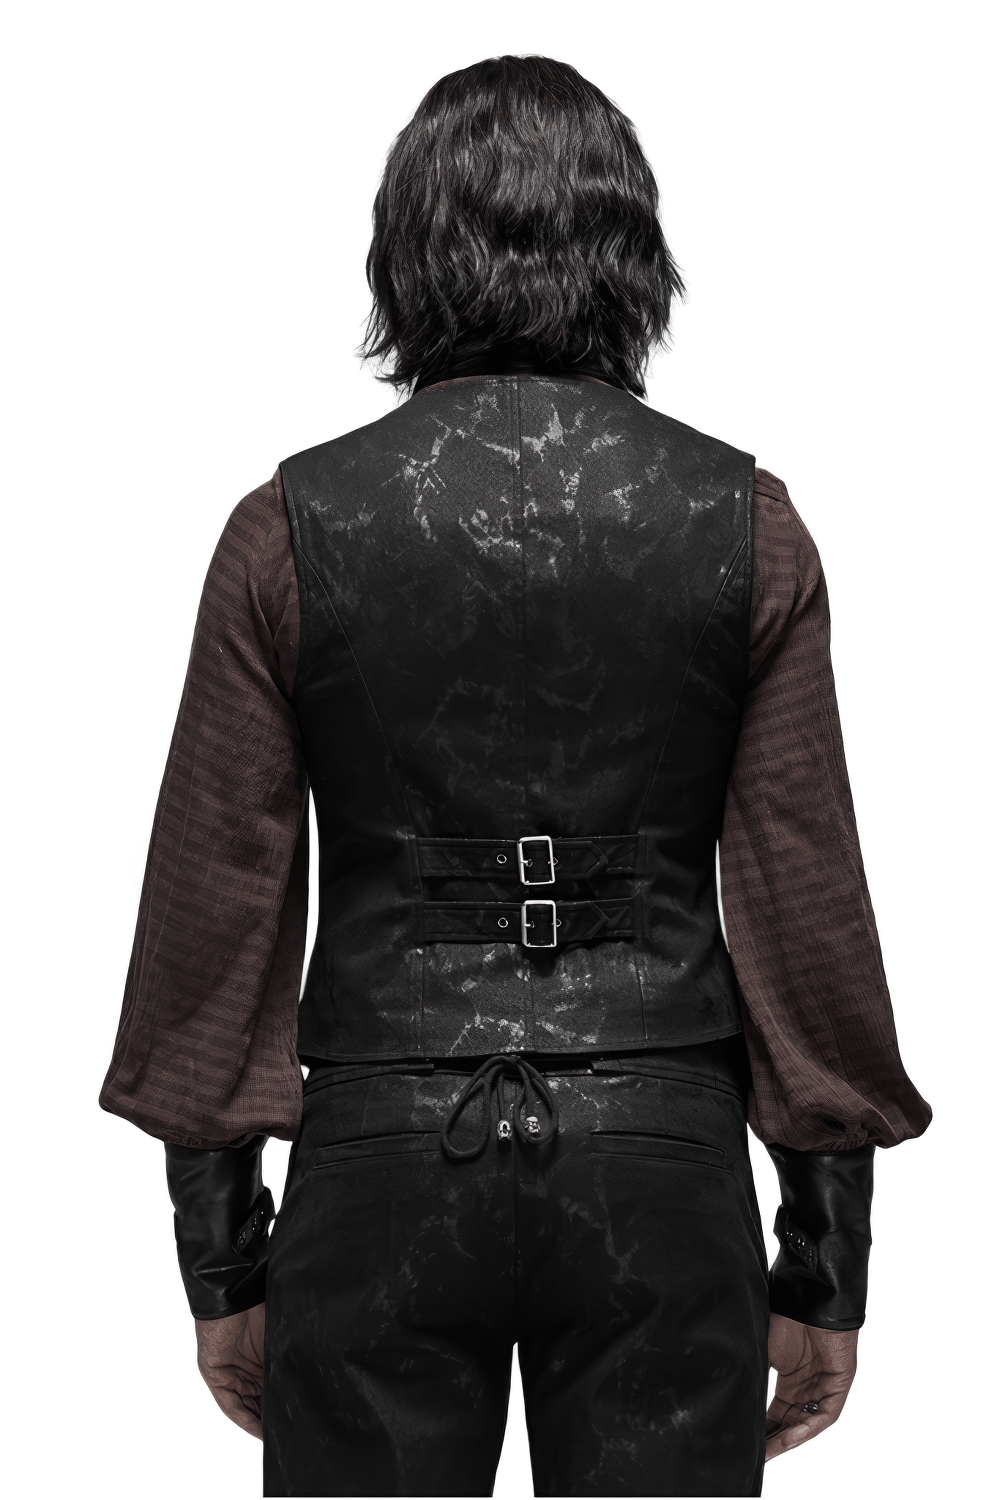 Gothic Style Men's Vest with Metal Buckles and Lacing